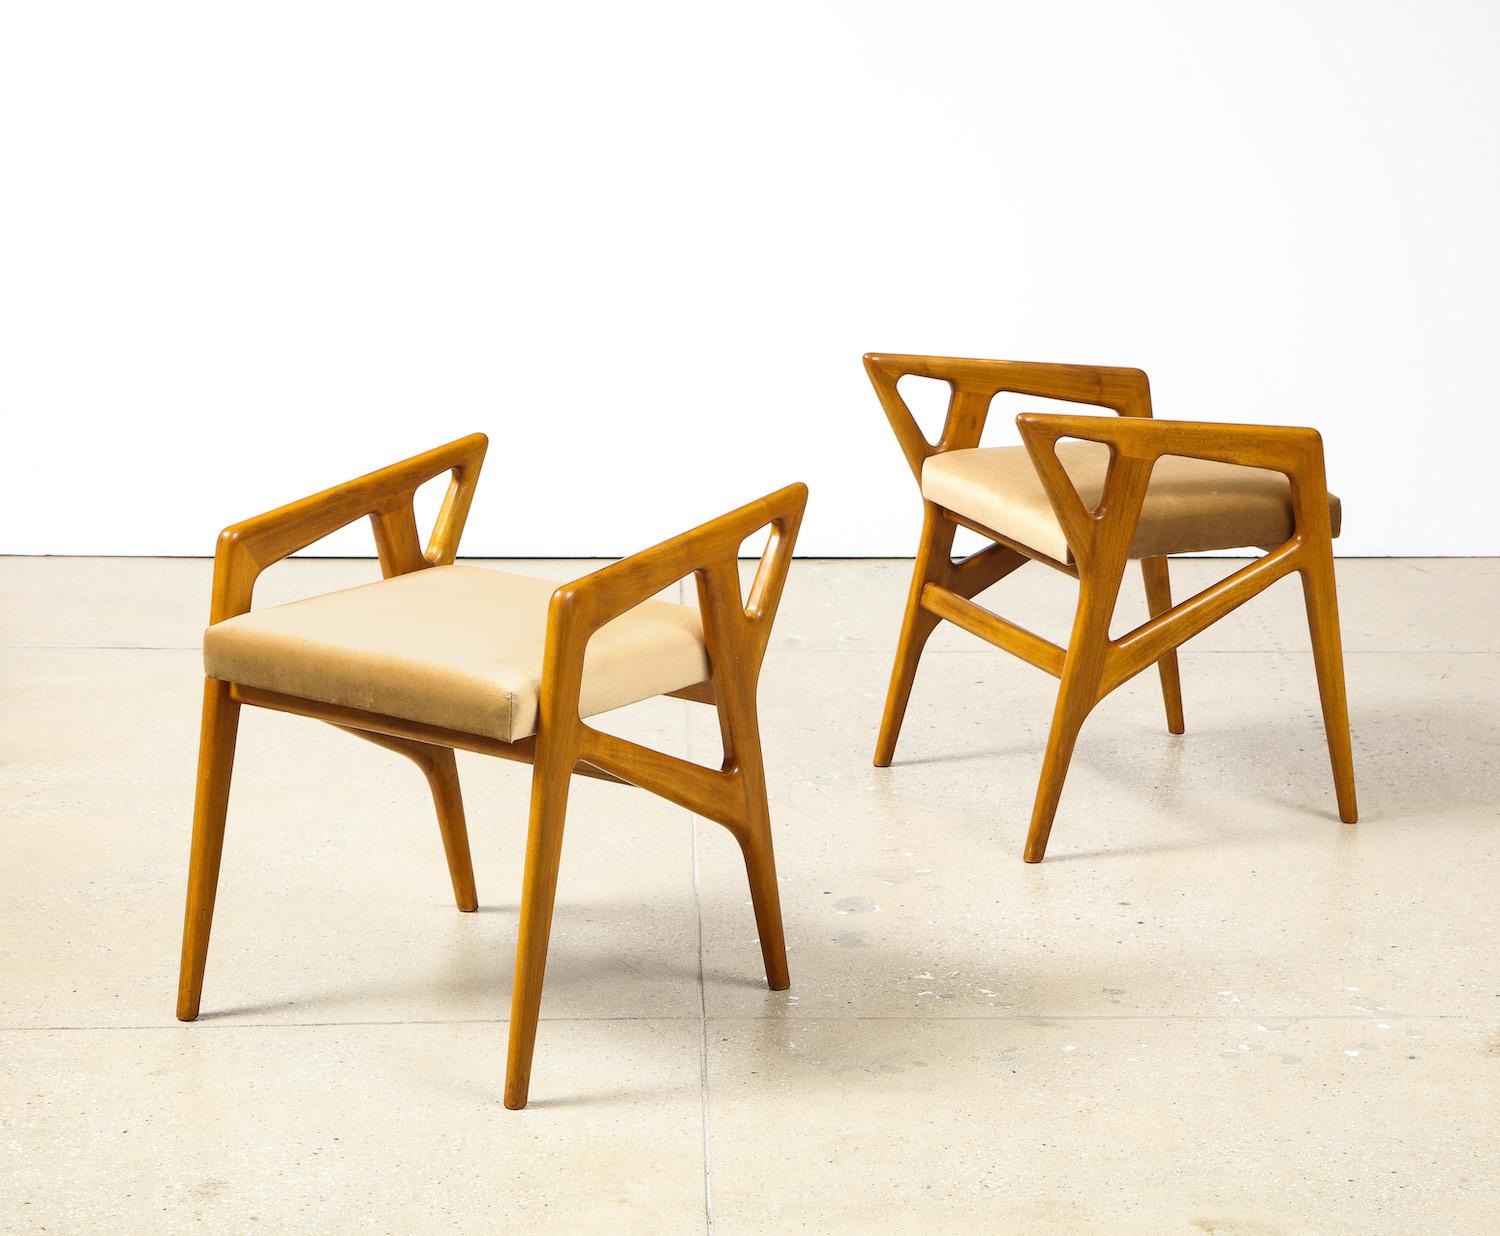 Modern Rare Pair of Sculptural Stools by Gio Ponti